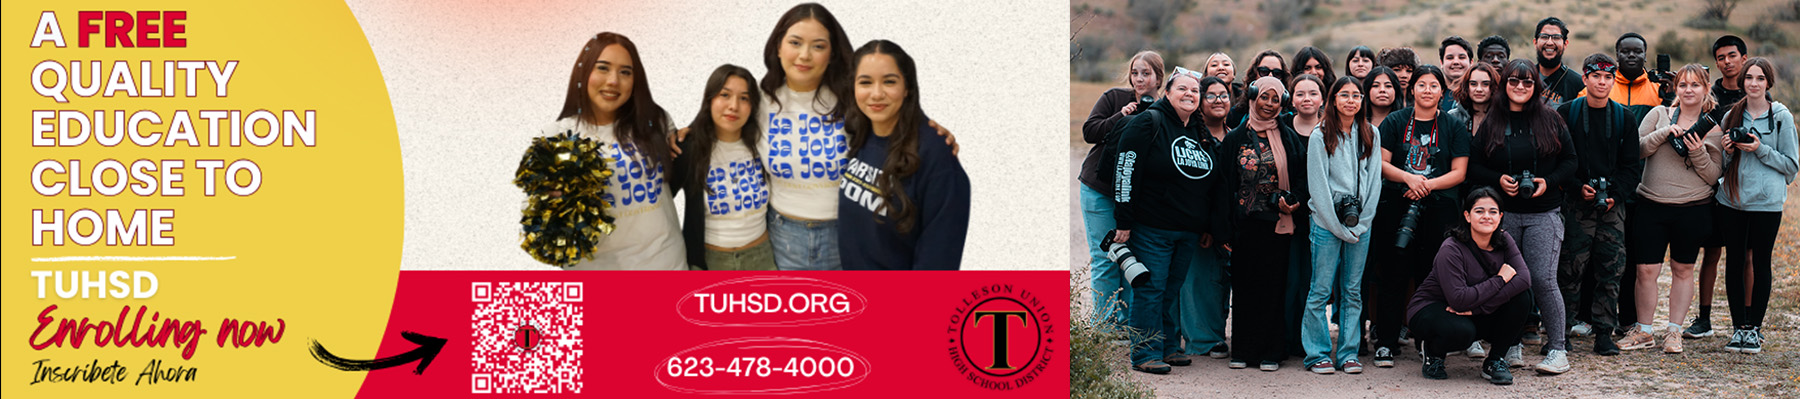 SUPPORT OUR SCHOOLS WITH A TAX CREDIT DONATION! Single person donation of $200 or married joint filing donation of $400 Remember TUHSD when you're filing your taxes! | Group of happy students outside